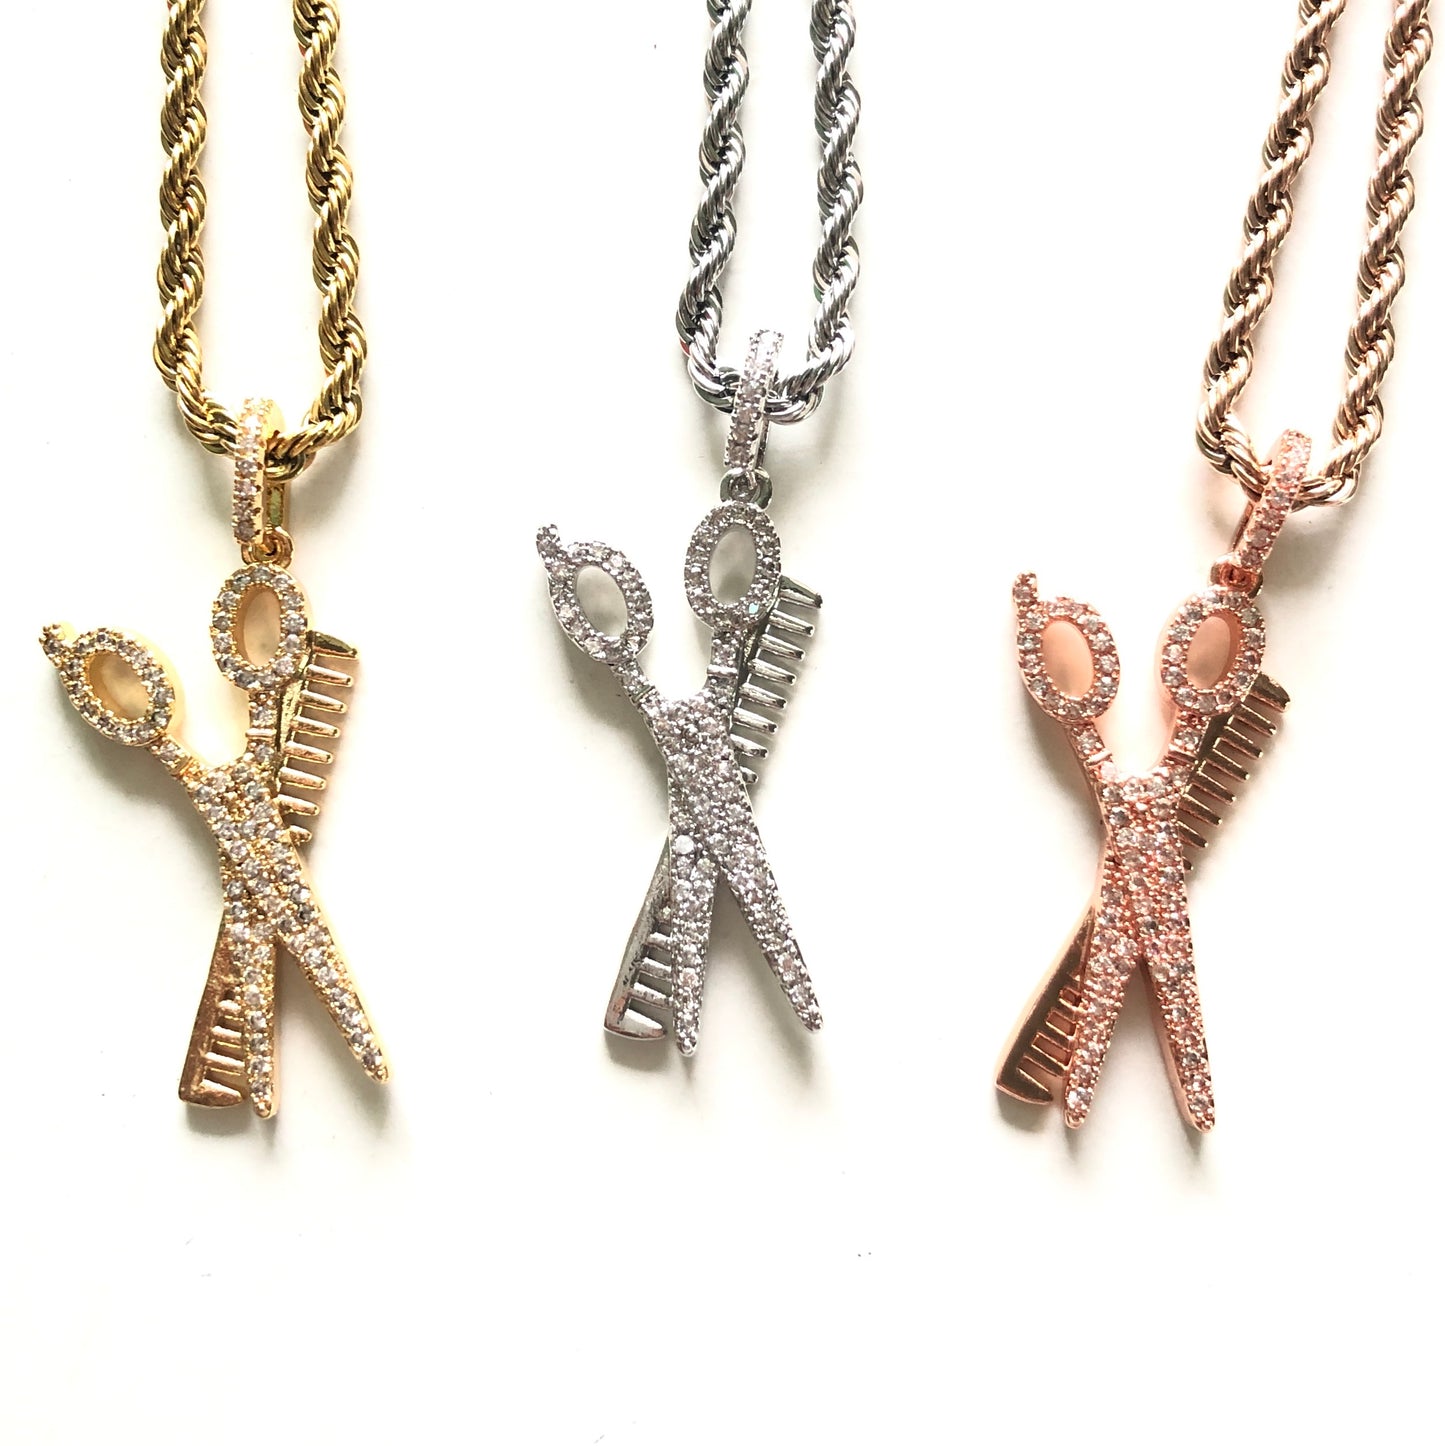 5pcs/lot 18/20/24 inch Stainless Rope Chain CZ Paved Scissor Comb Necklace Mix Colors Necklaces Charms Beads Beyond